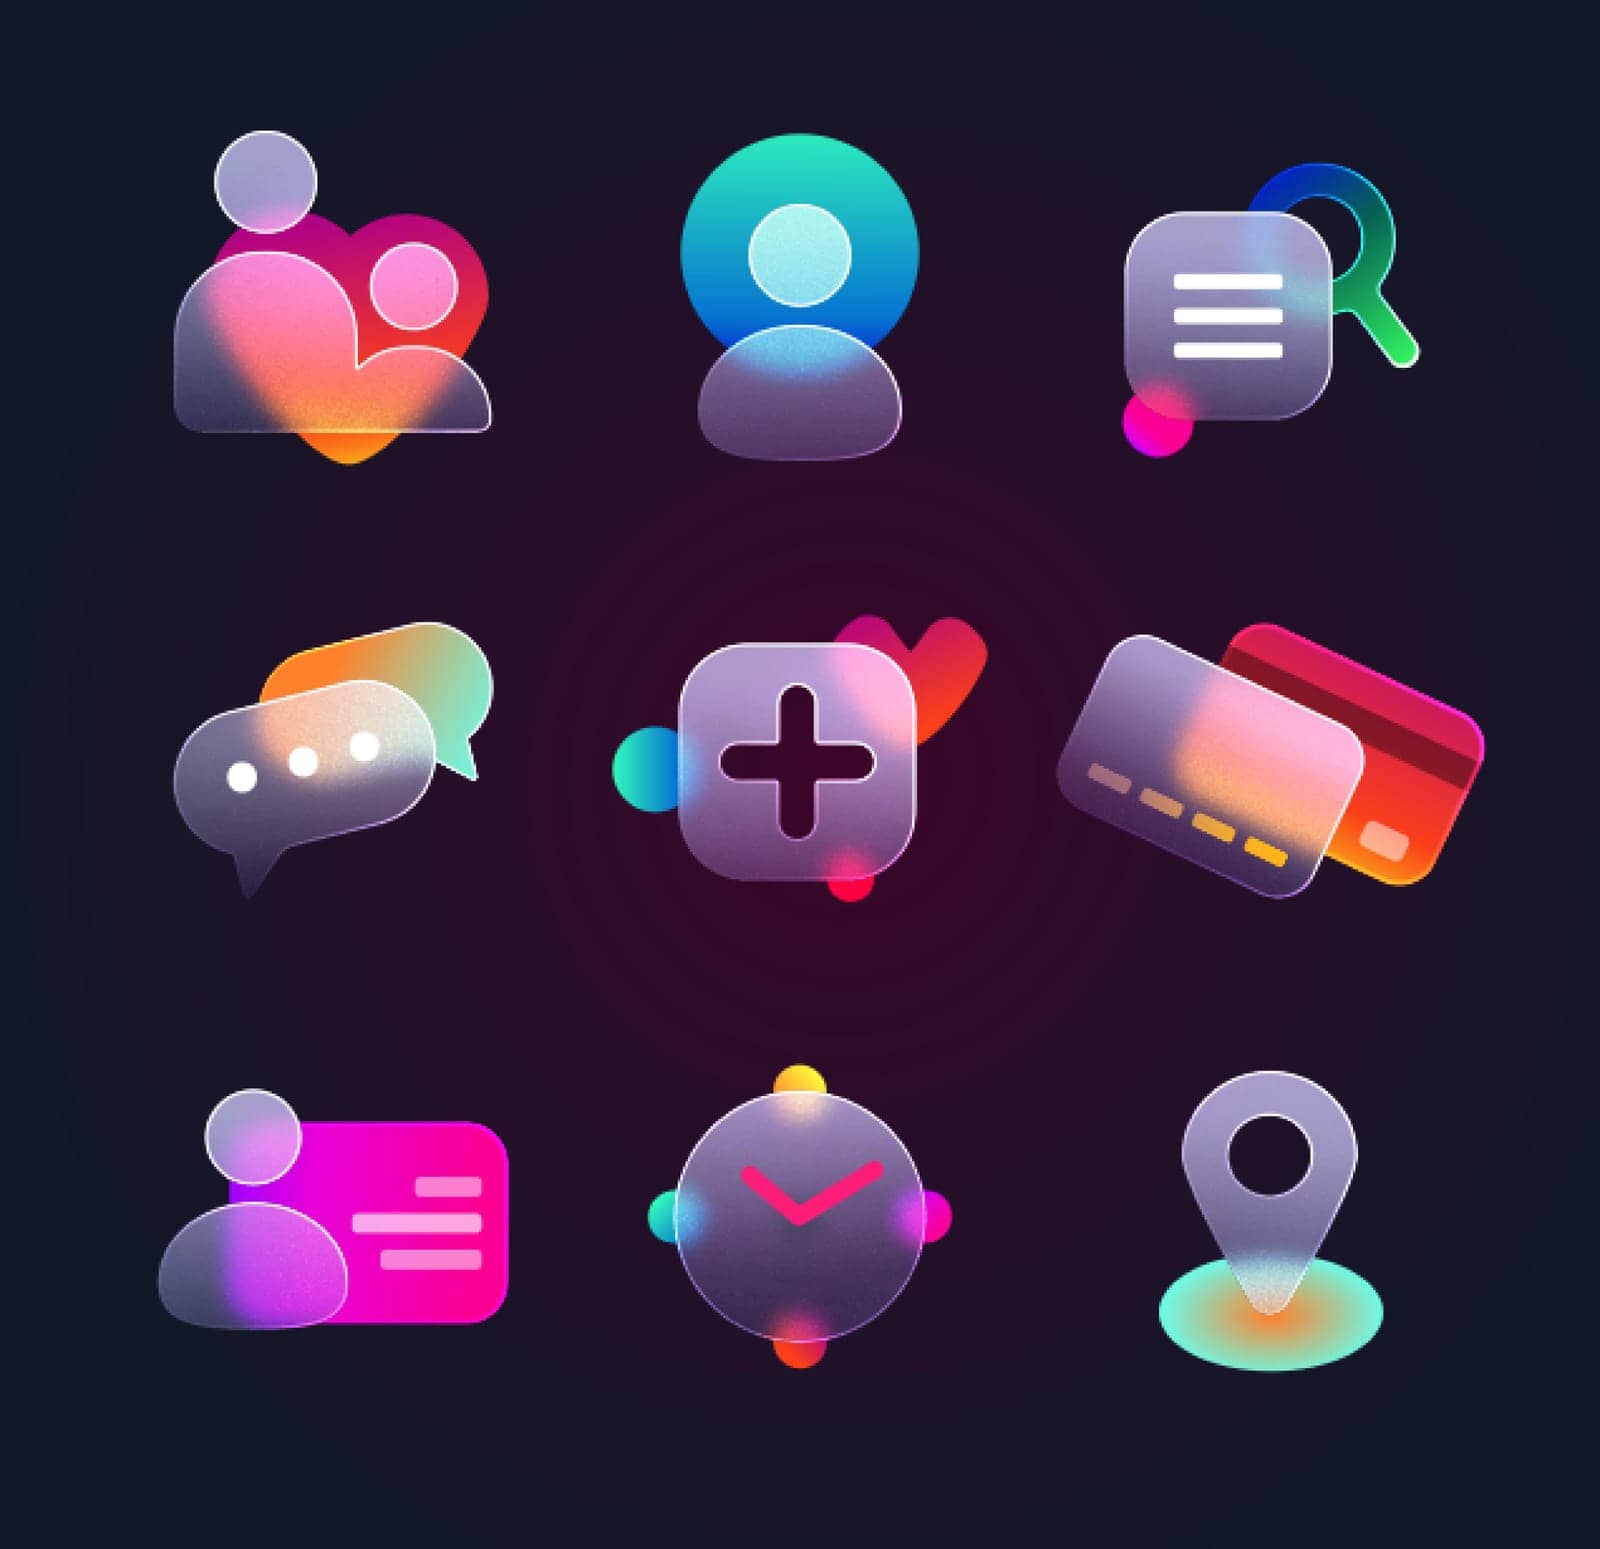 Realistic set of glassmorphism ui icons for website or mobile app. Vector location, chat, contact, social media, credit card and clock glass morphism transparent design elements on black background.